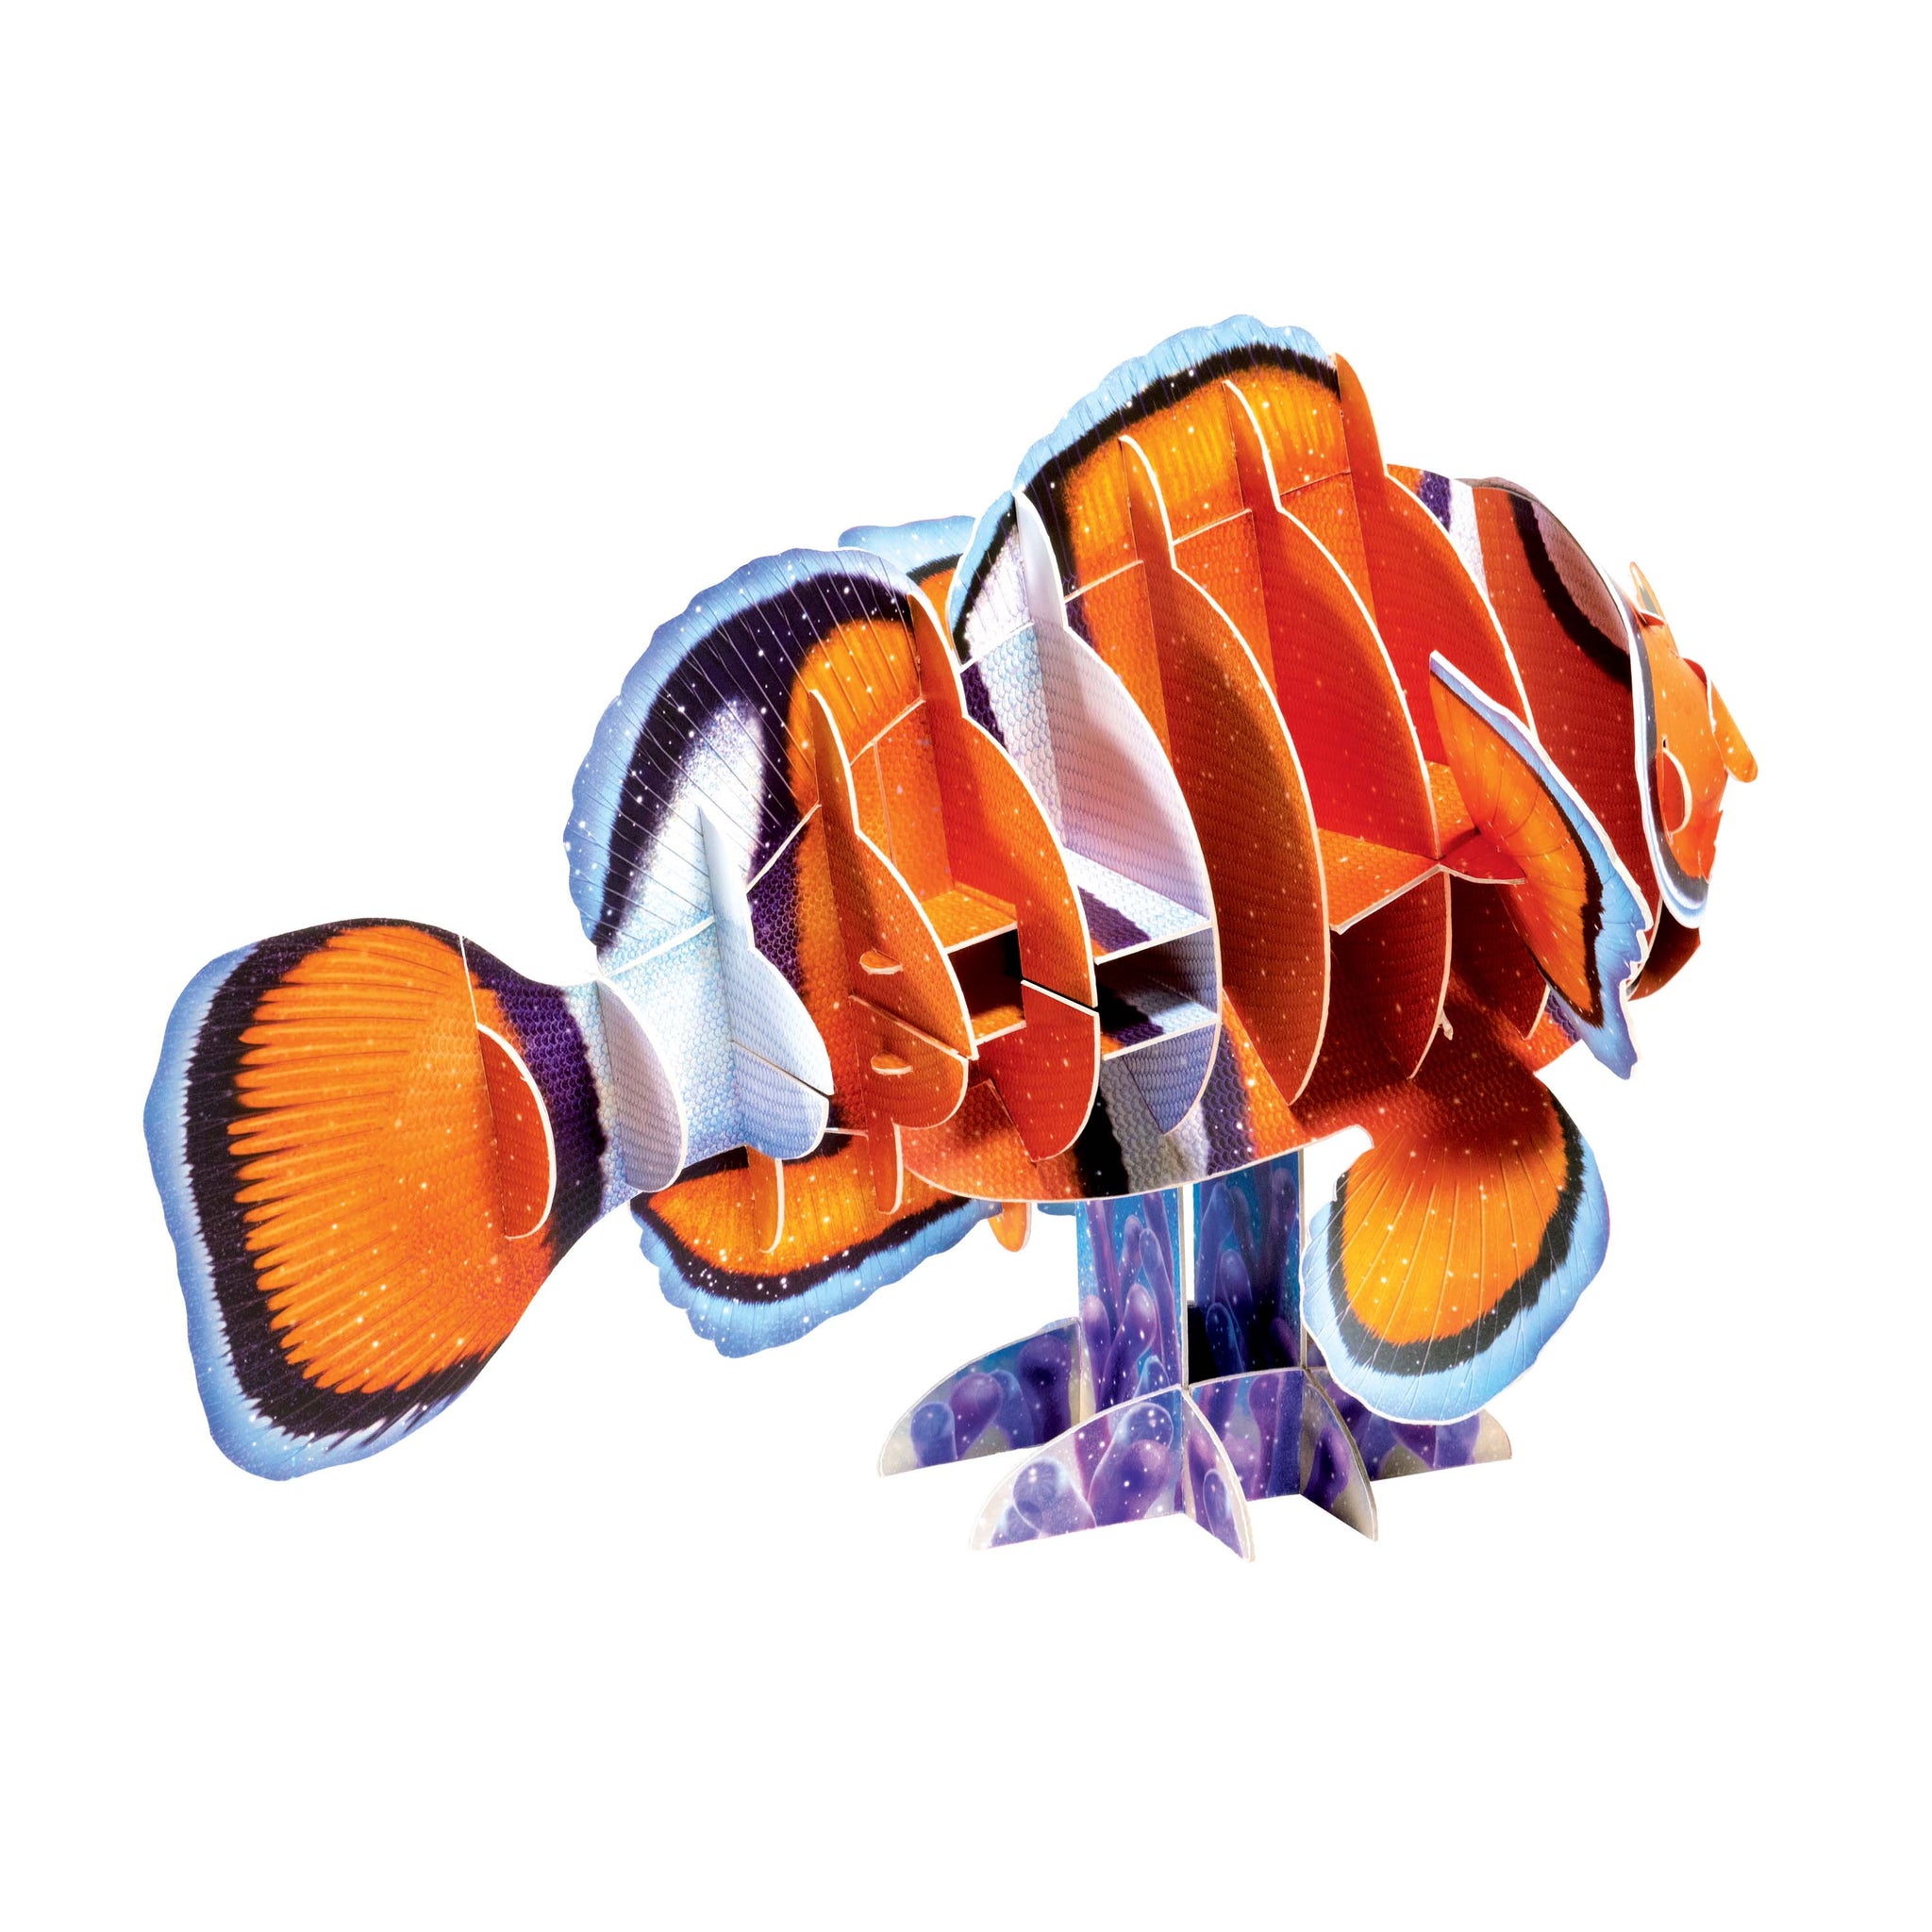 Build in 3D - Your own giant clownfish